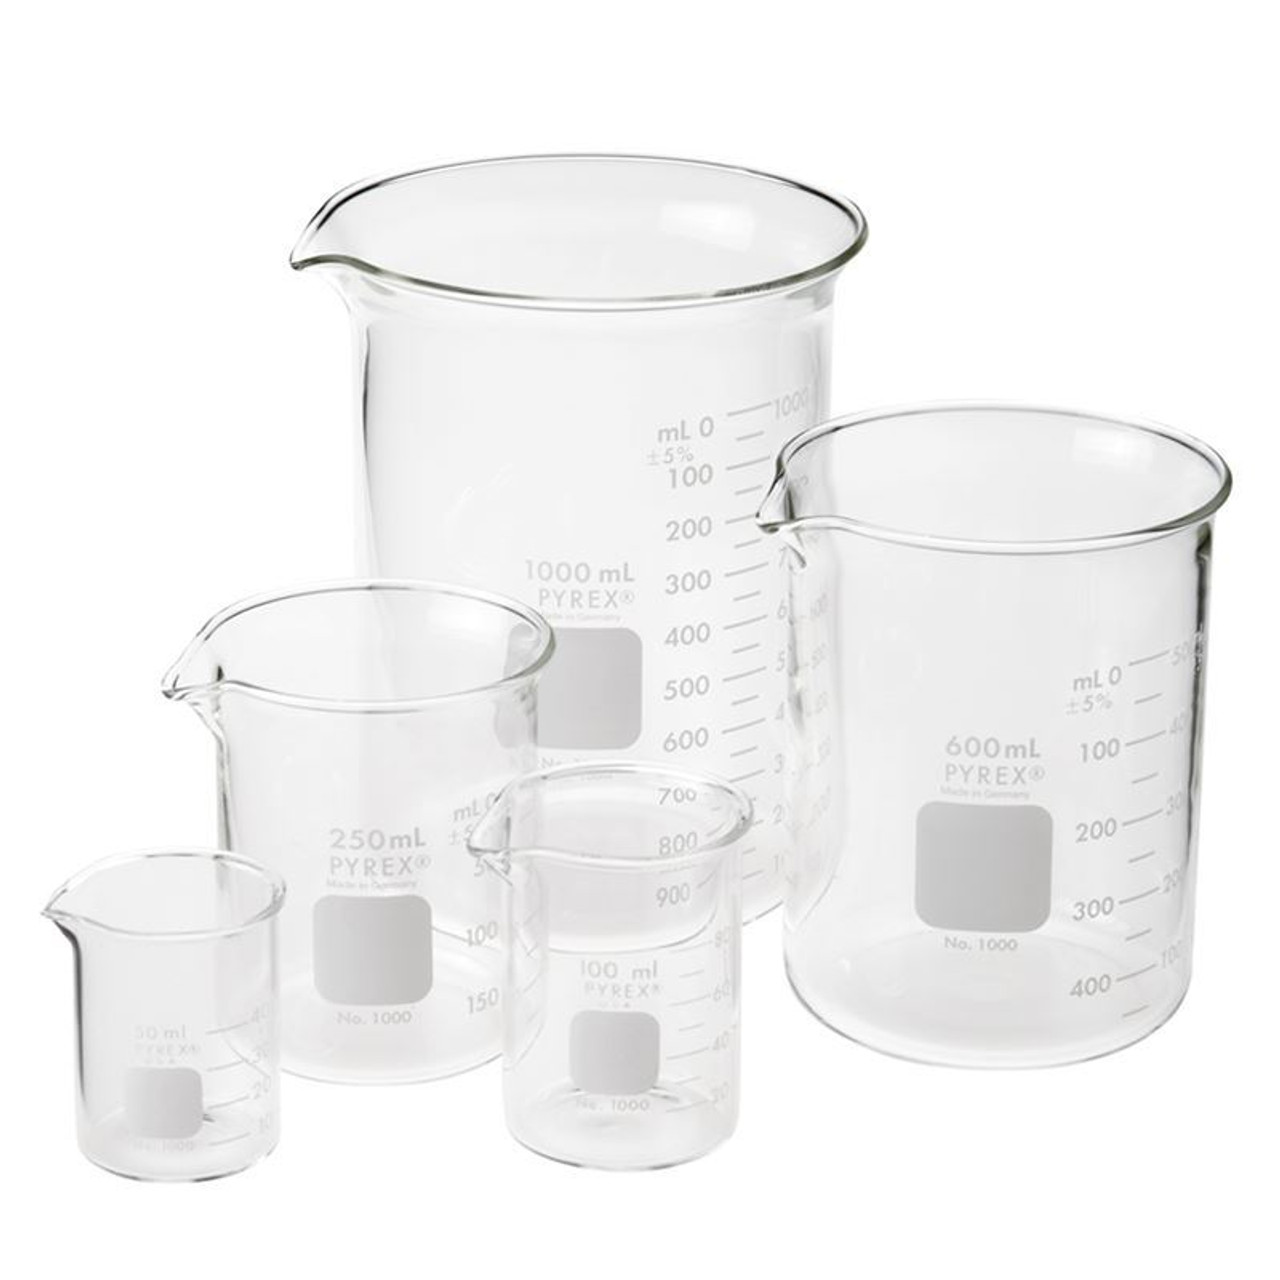 Pyrex low form Griffin 10ml clear borosilicate glass beaker - 1000